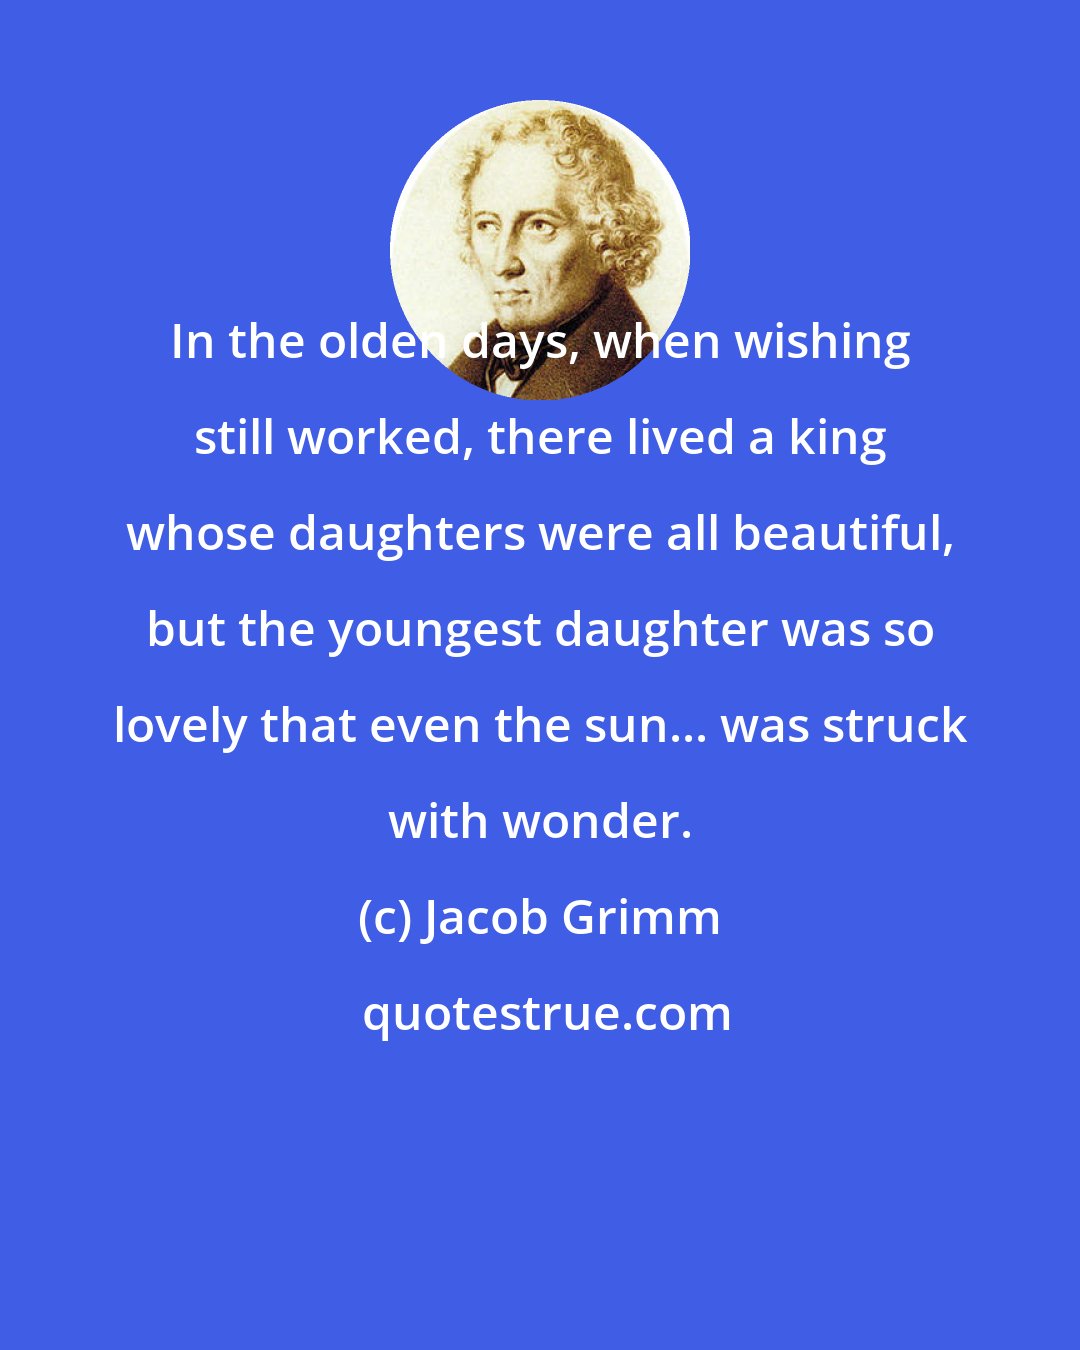 Jacob Grimm: In the olden days, when wishing still worked, there lived a king whose daughters were all beautiful, but the youngest daughter was so lovely that even the sun... was struck with wonder.